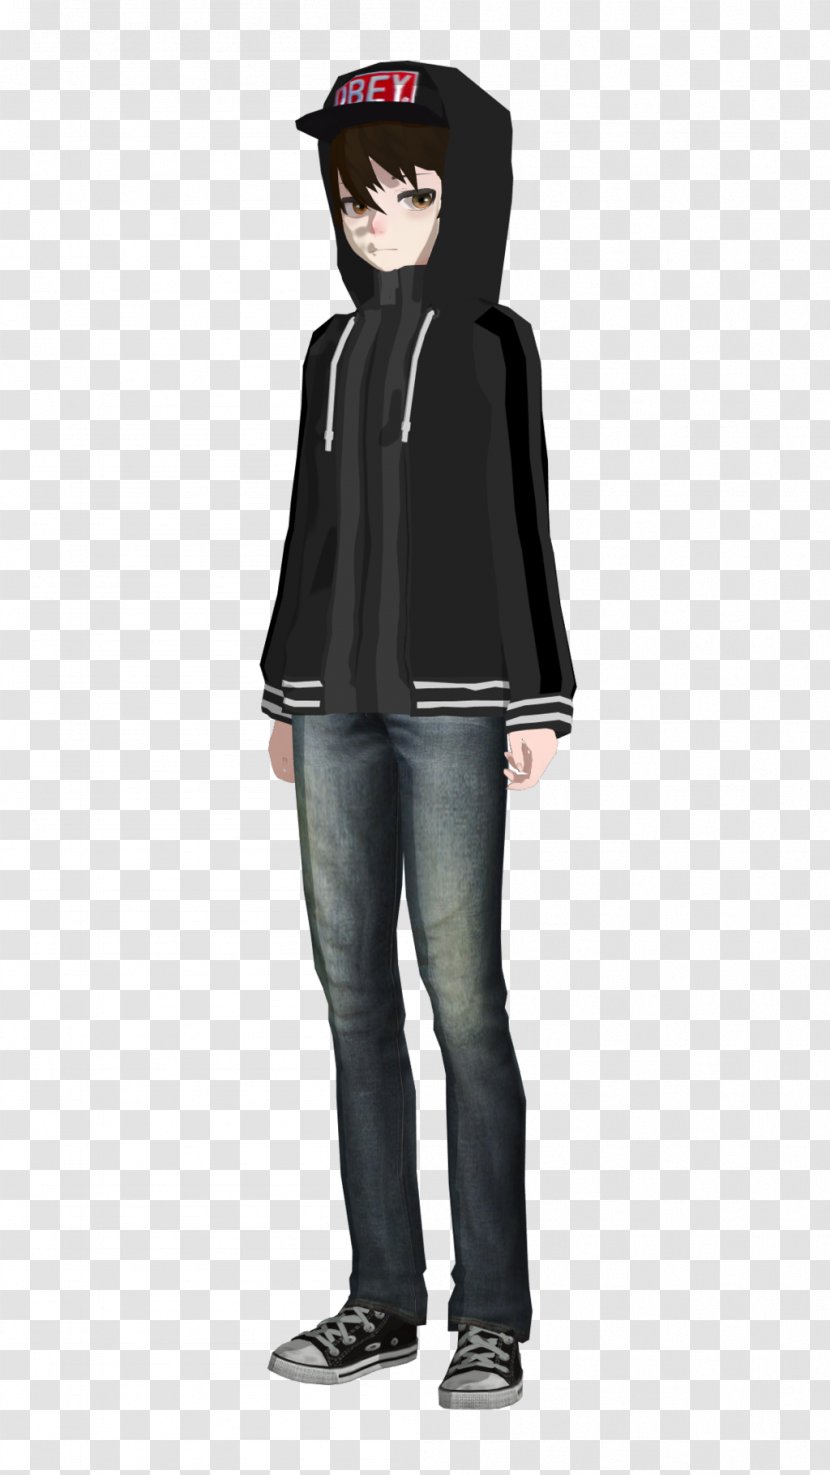 DeviantArt Hoodie LeafyIsHere Photography - Deviantart - Character Chin Transparent PNG